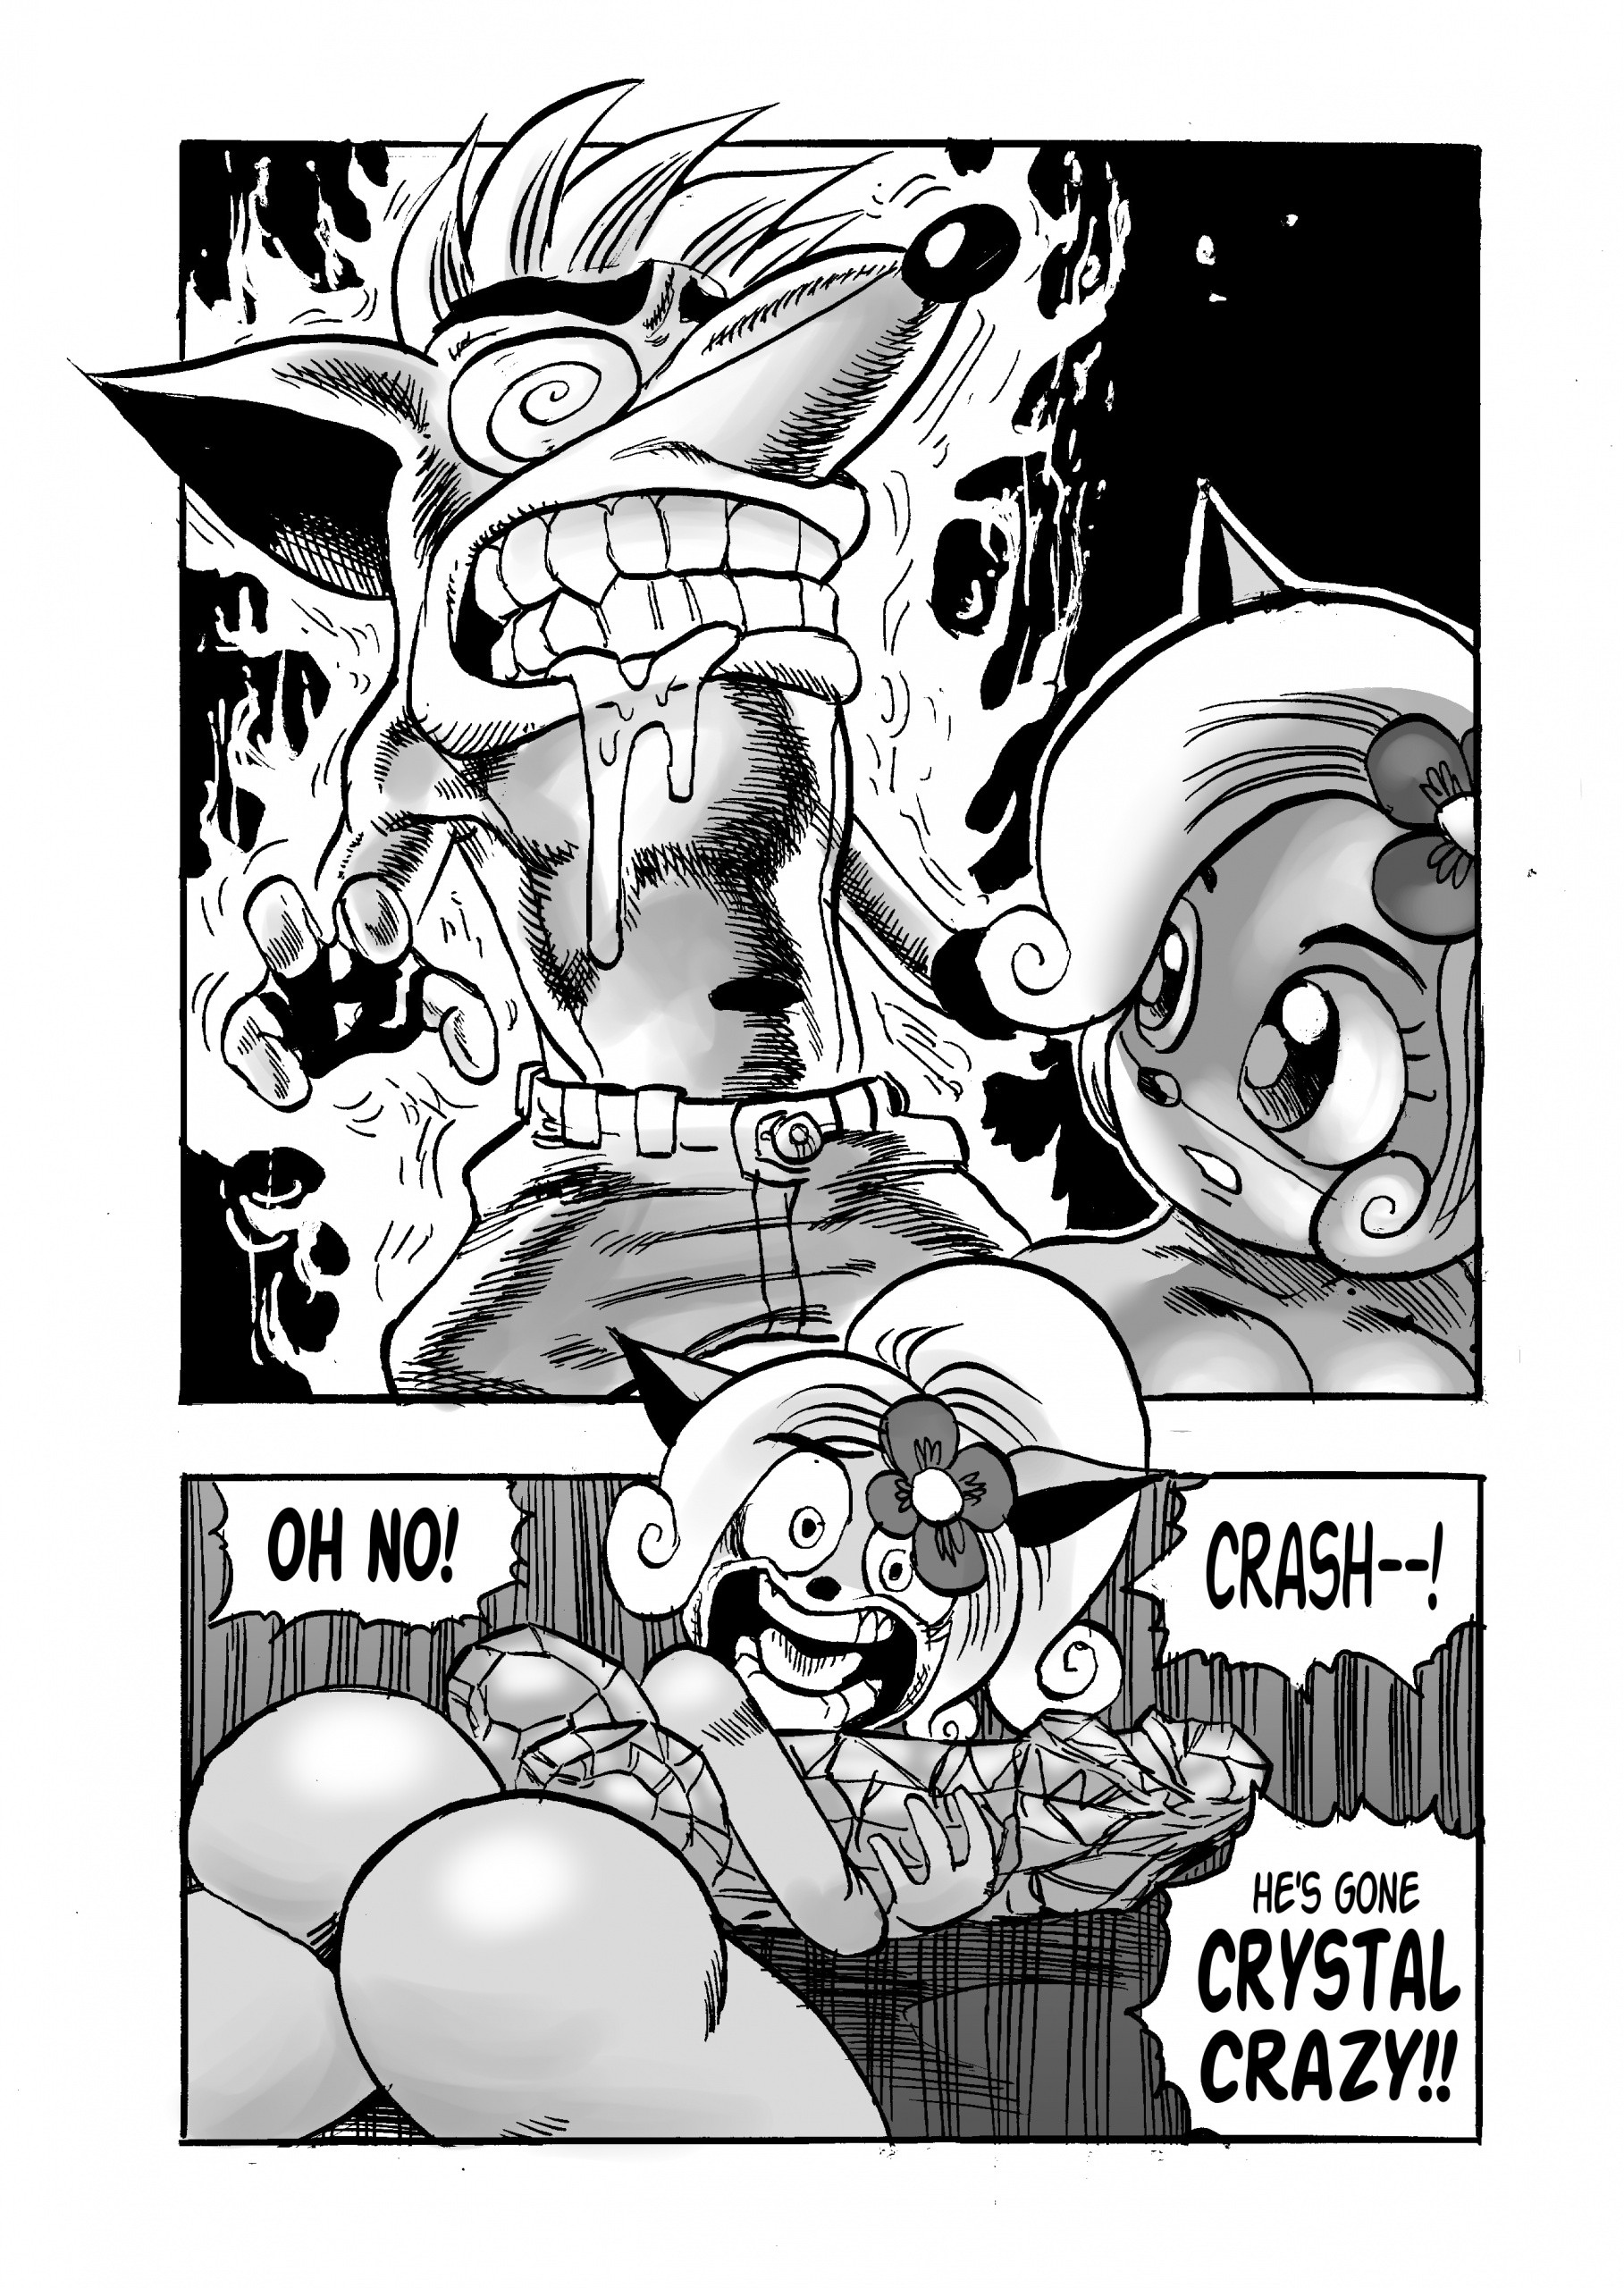 Coco's Gon' Crystal Crazy porn comic picture 12